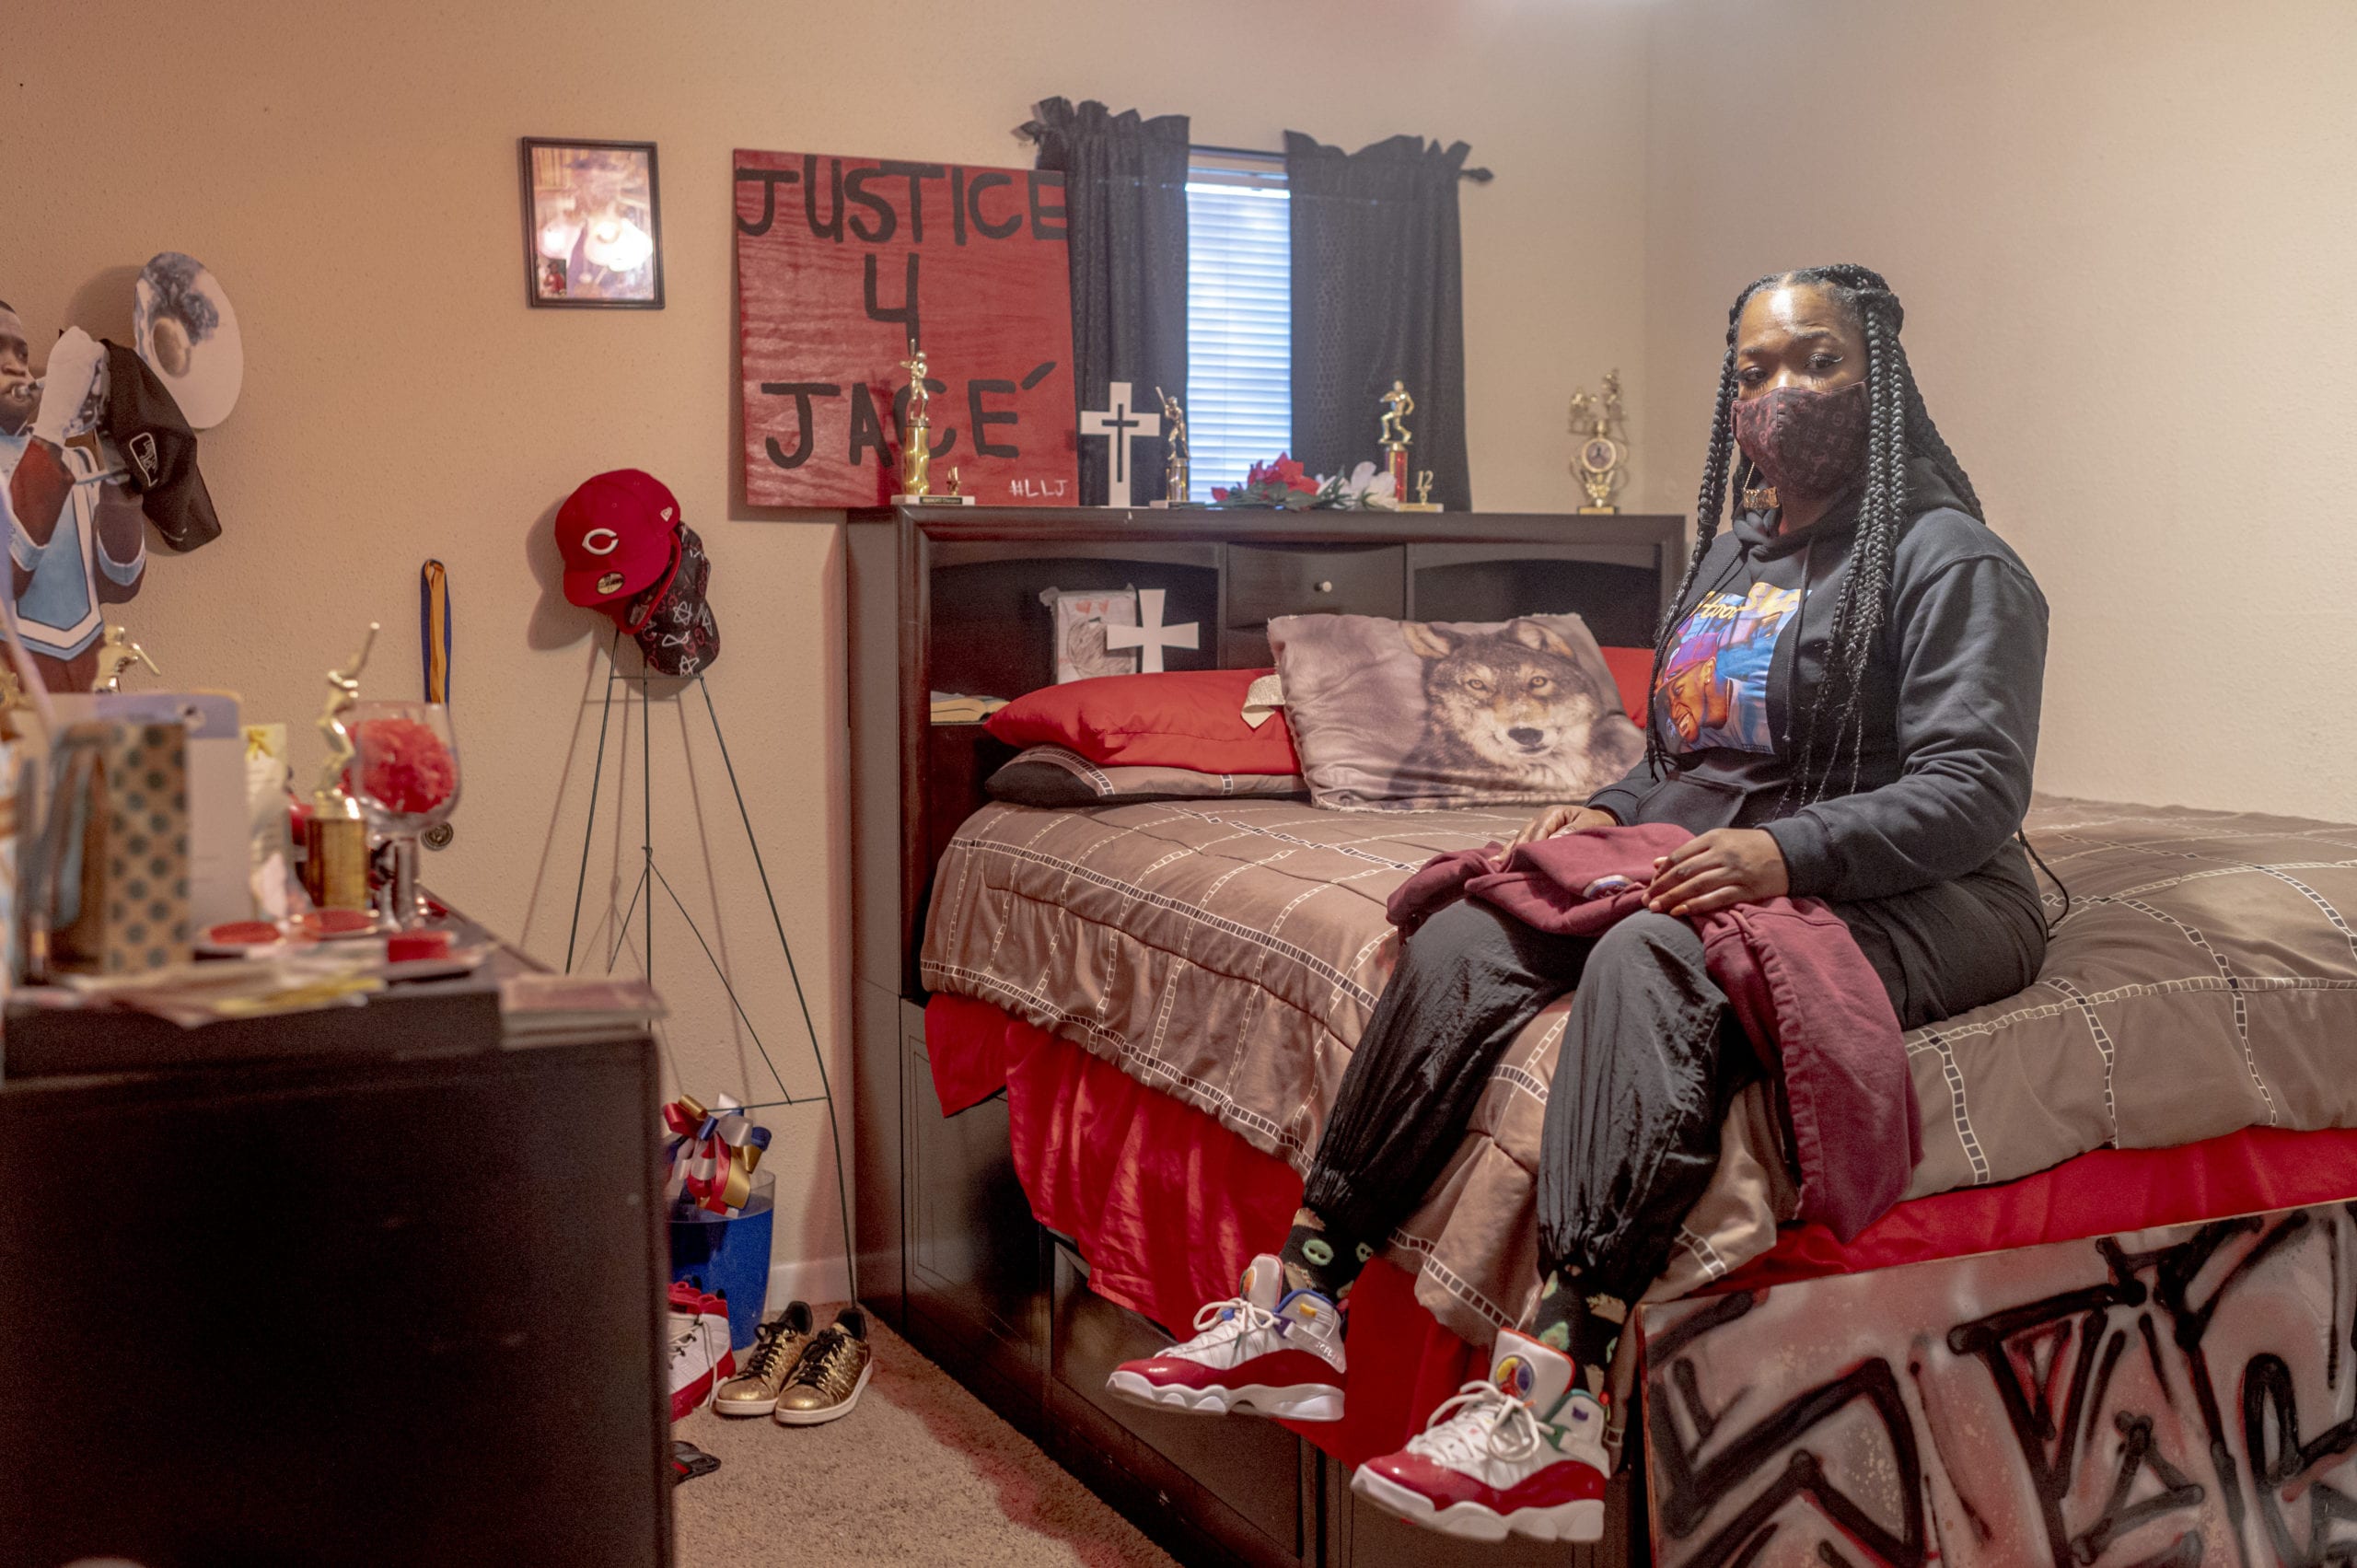 For Shanta Scott, eviction would mean packing up her late son’s bedroom, her last physical tether to him.